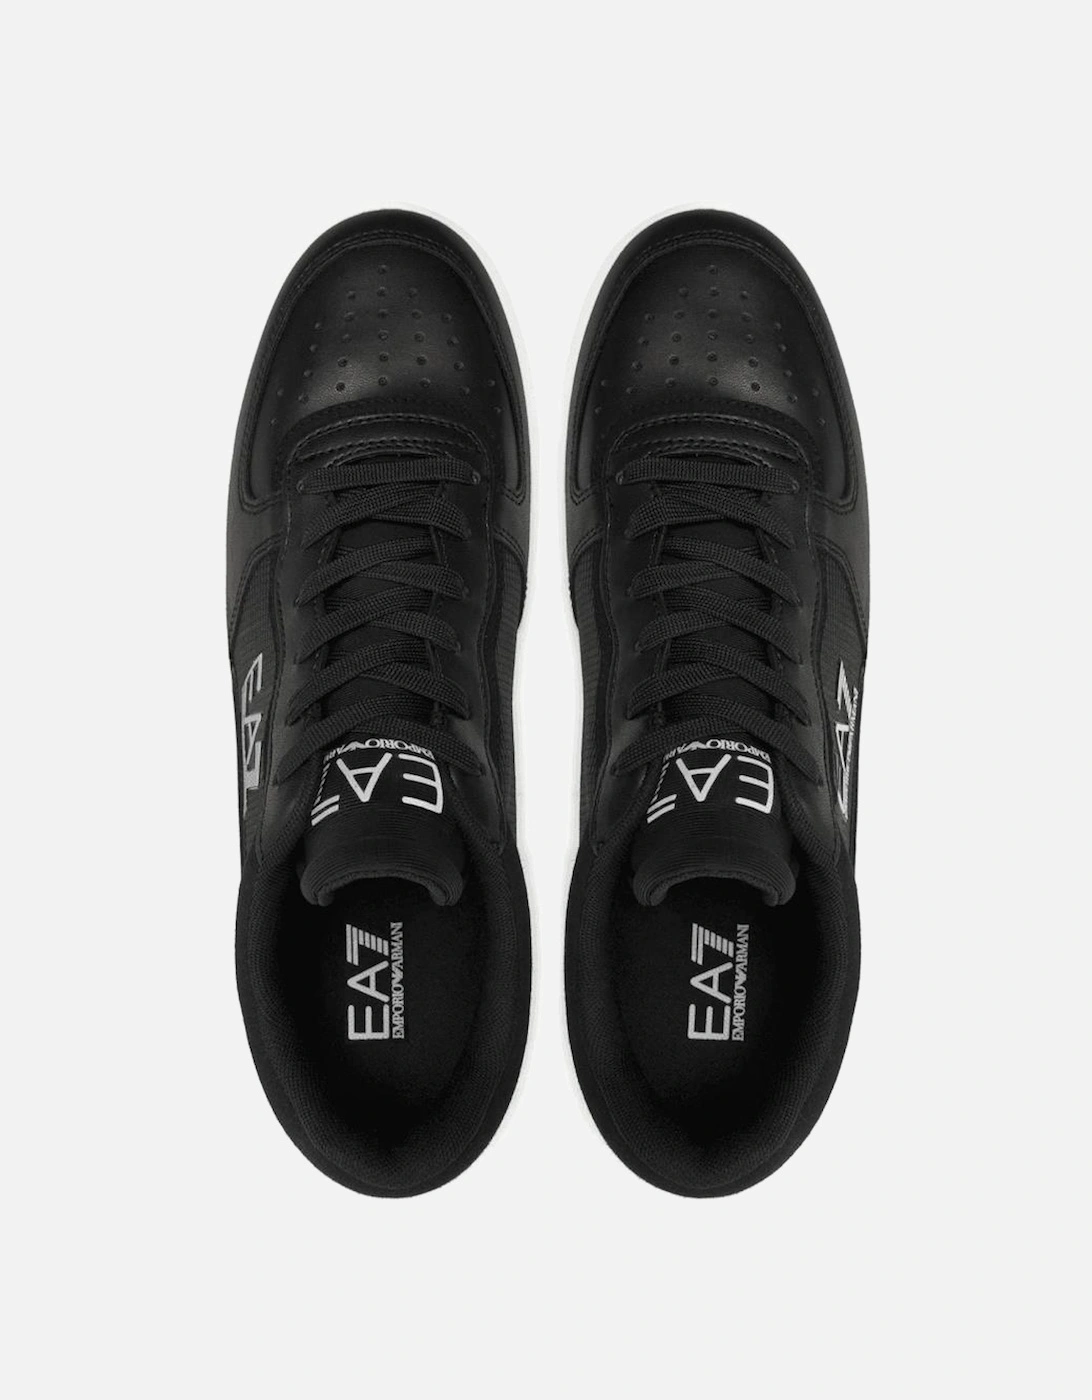 Lace Up Leather/Mesh Black Trainer